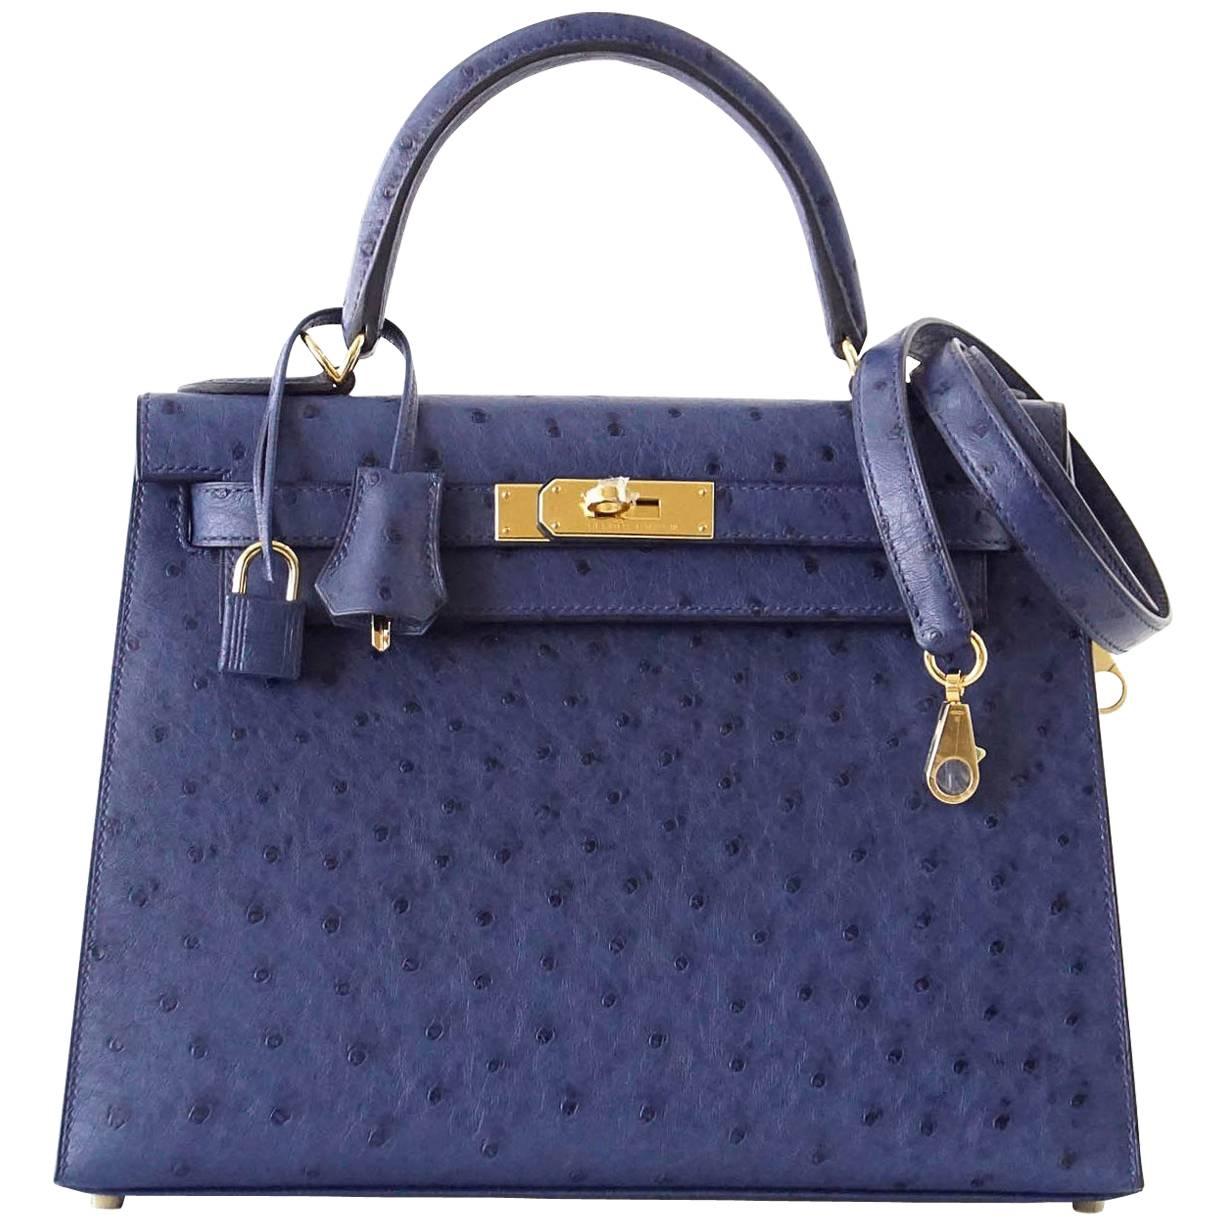 A BLEUET OSTRICH SELLIER KELLY 28 WITH GOLD HARDWARE, HERMÈS, 2021